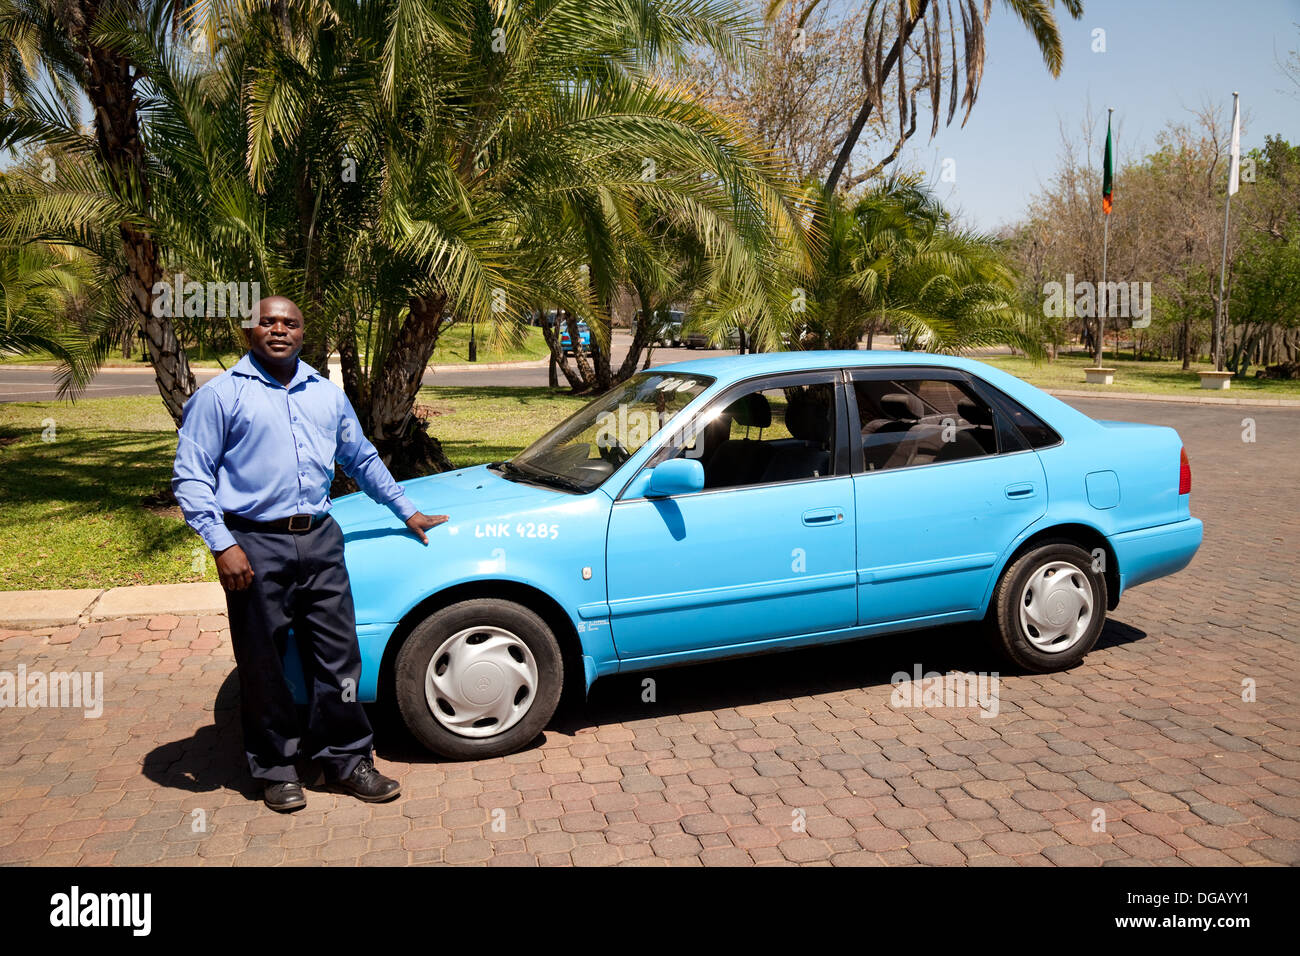 Taxi driver and typical Zambian blue taxi cab, Zambia, Africa Stock Photo